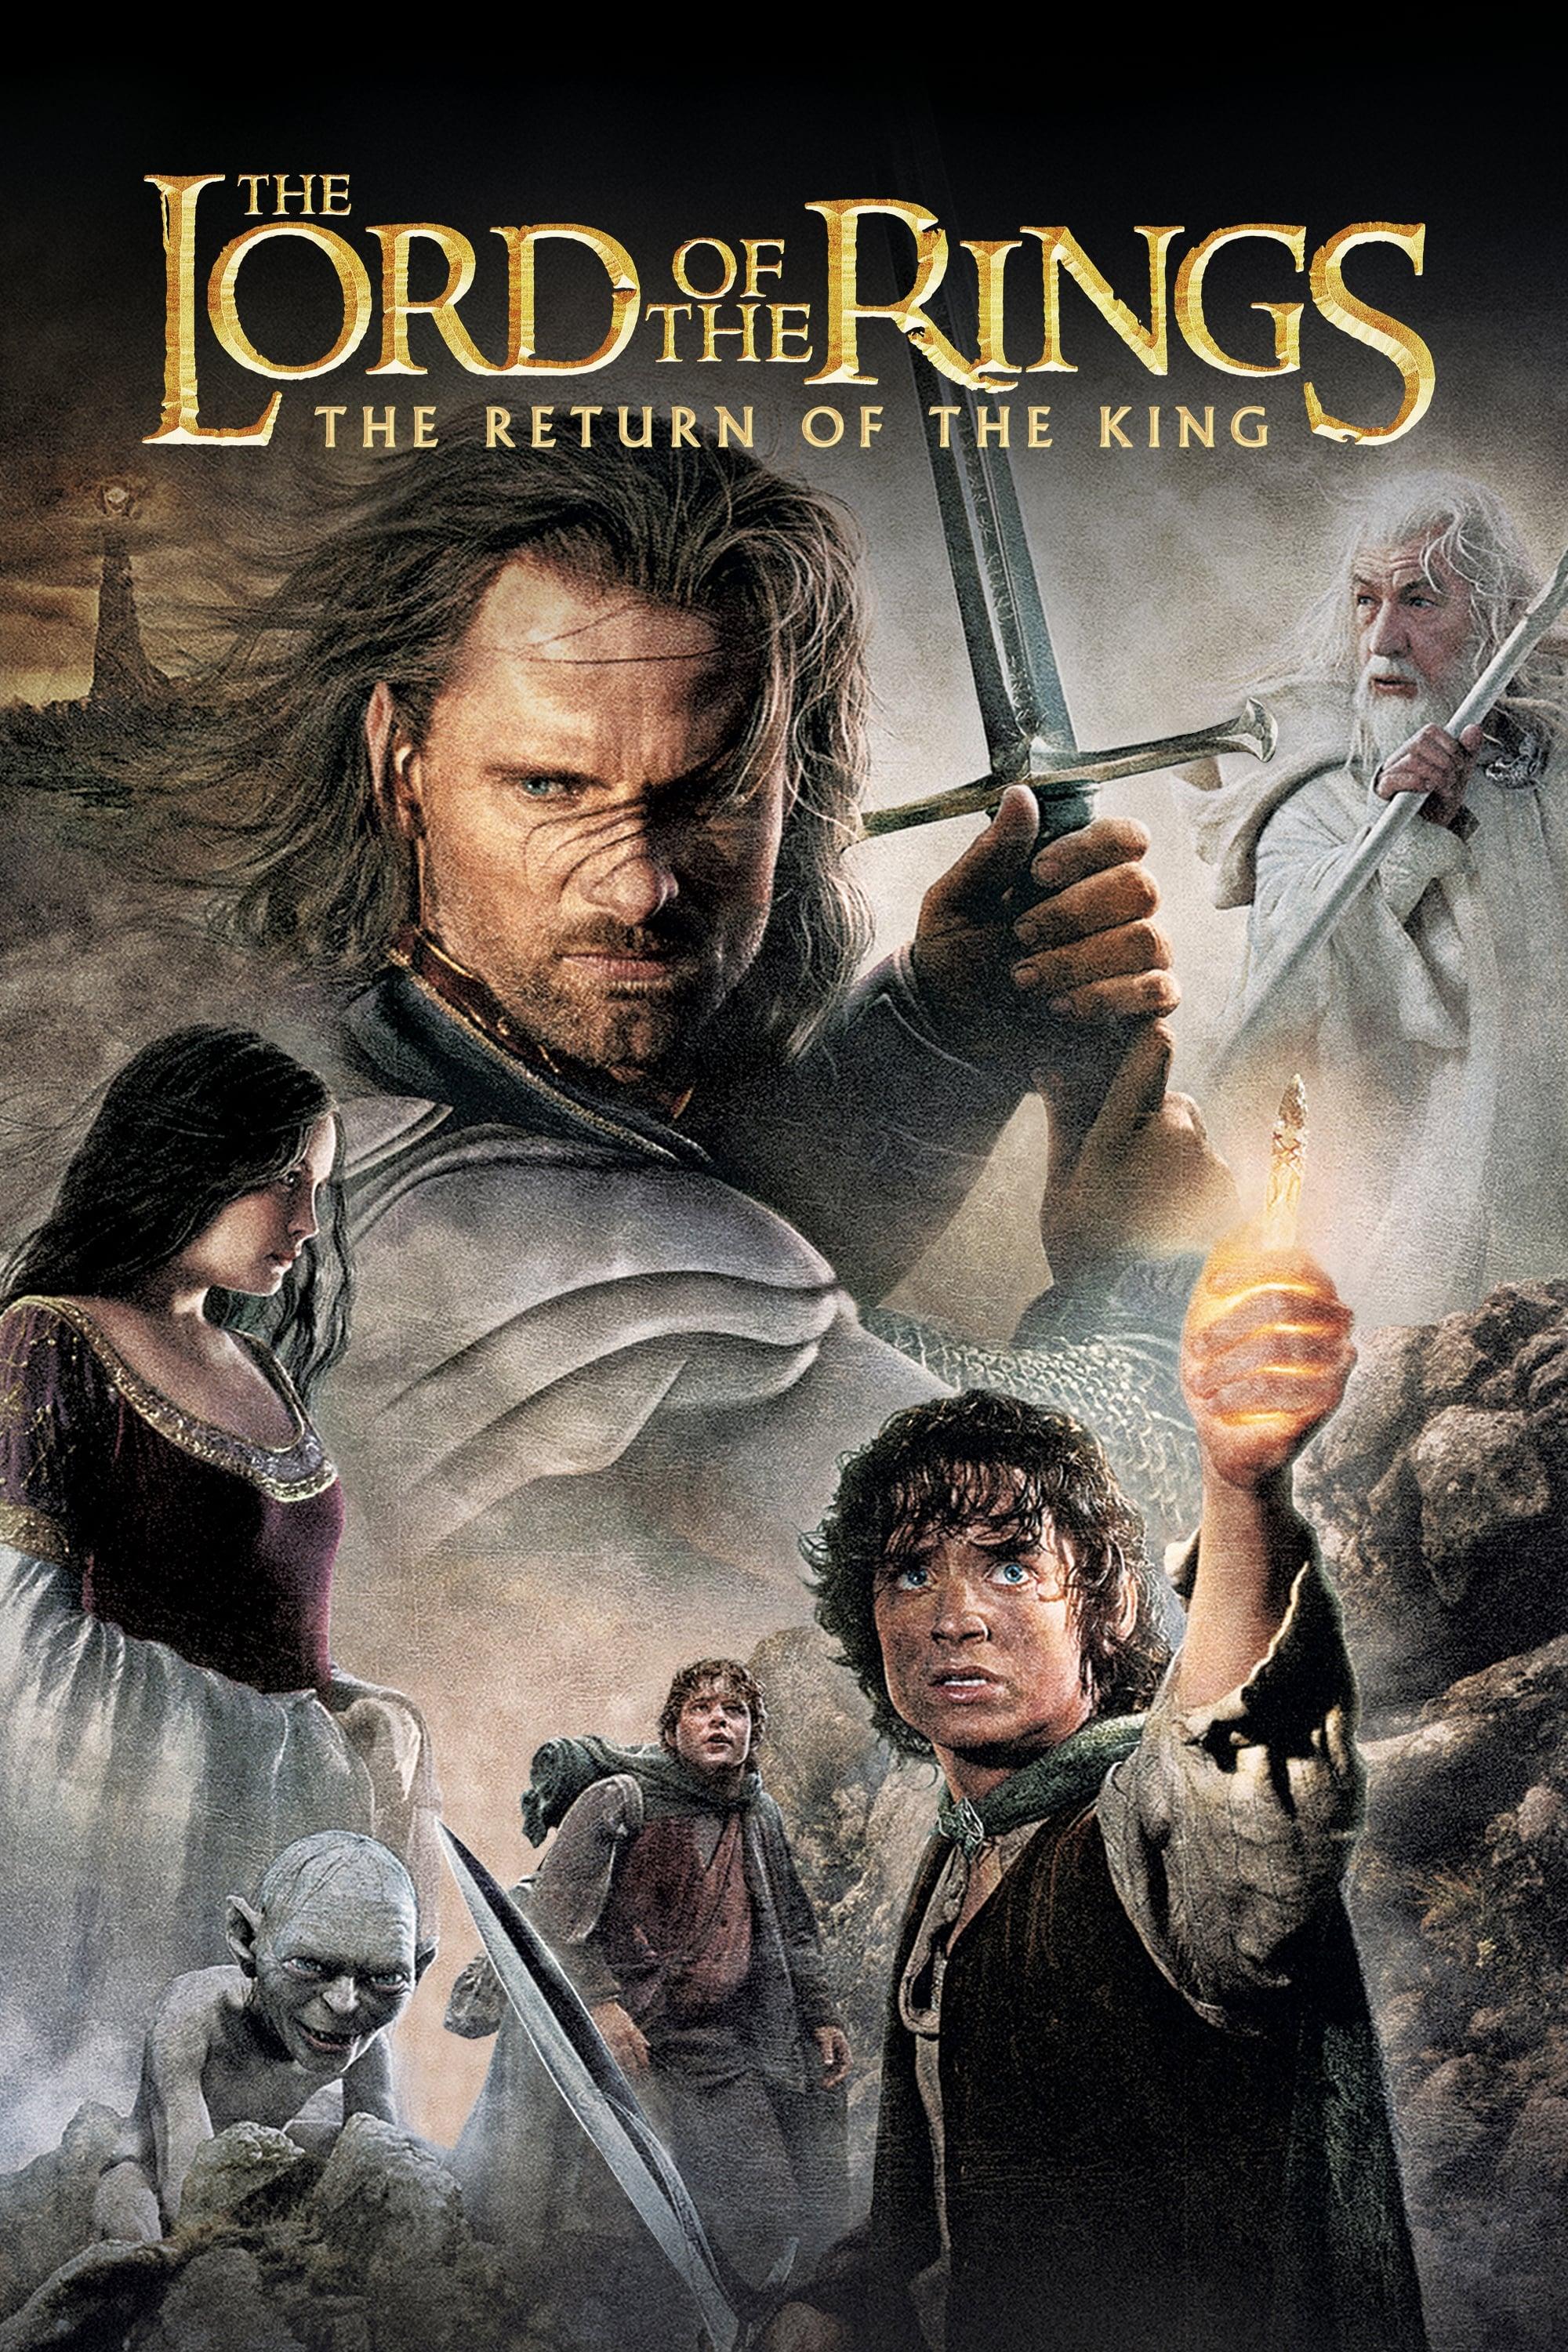 Movie poster of "The Lord of the Rings: The Return of the King"